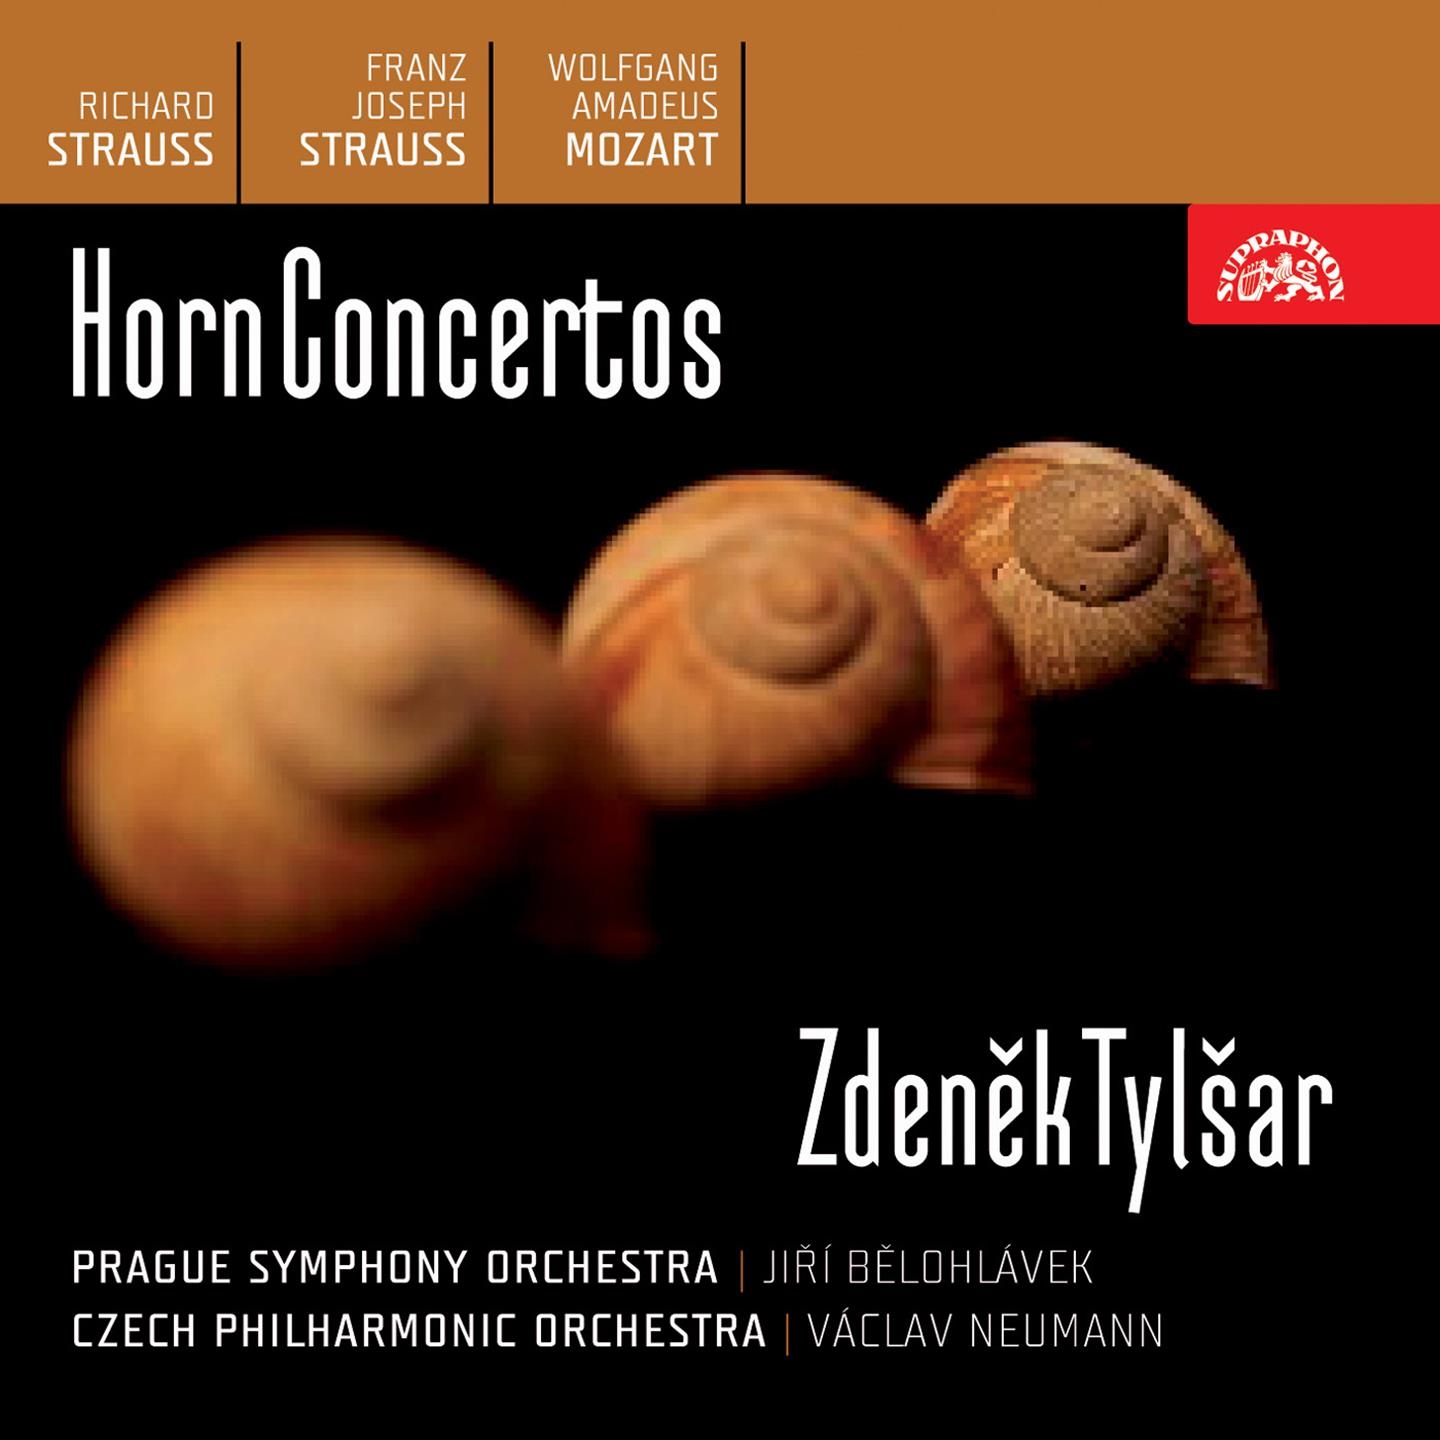 Concerto for French Horn and Orchestra No. 2 in E-Flat Major, .: III. Allegro molto